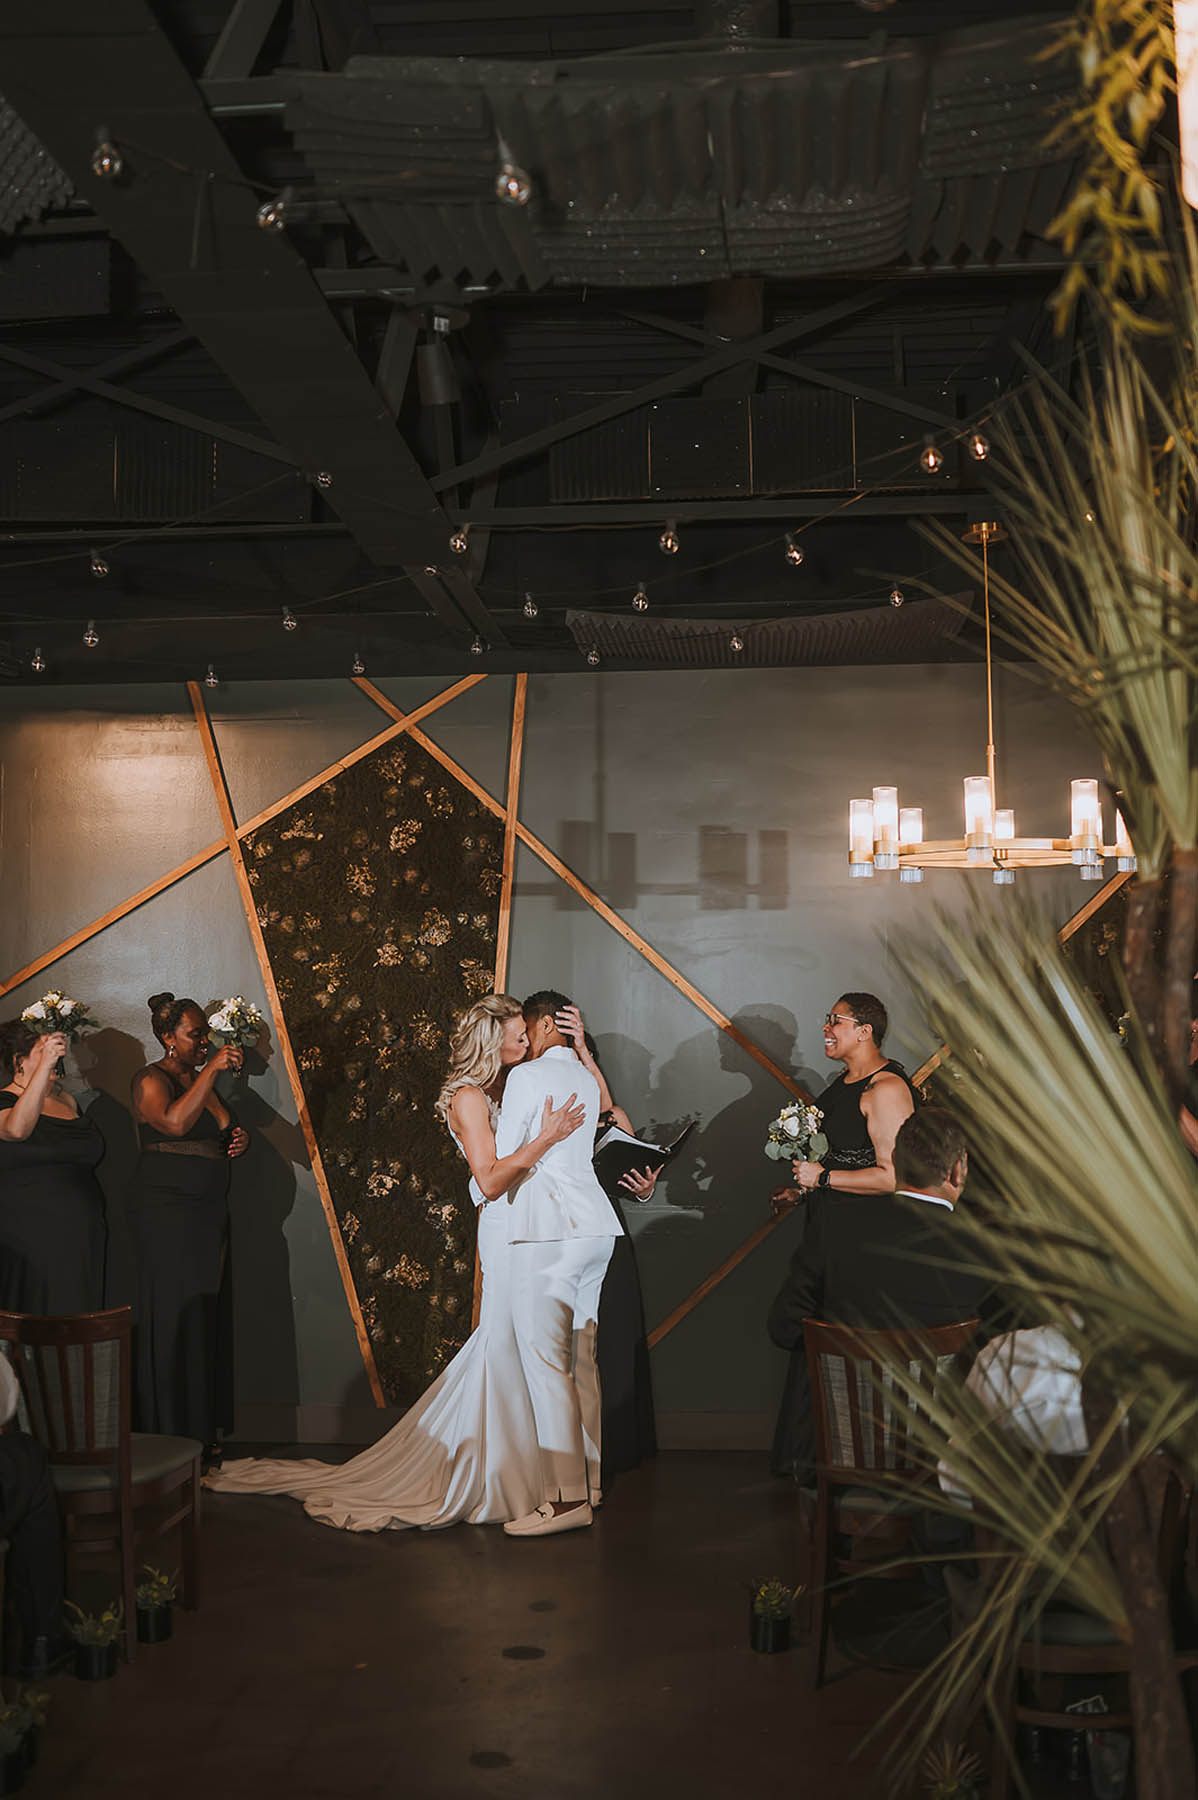 The newlyweds share a kiss in front of a geometric backdrop as their wedding party cheers.